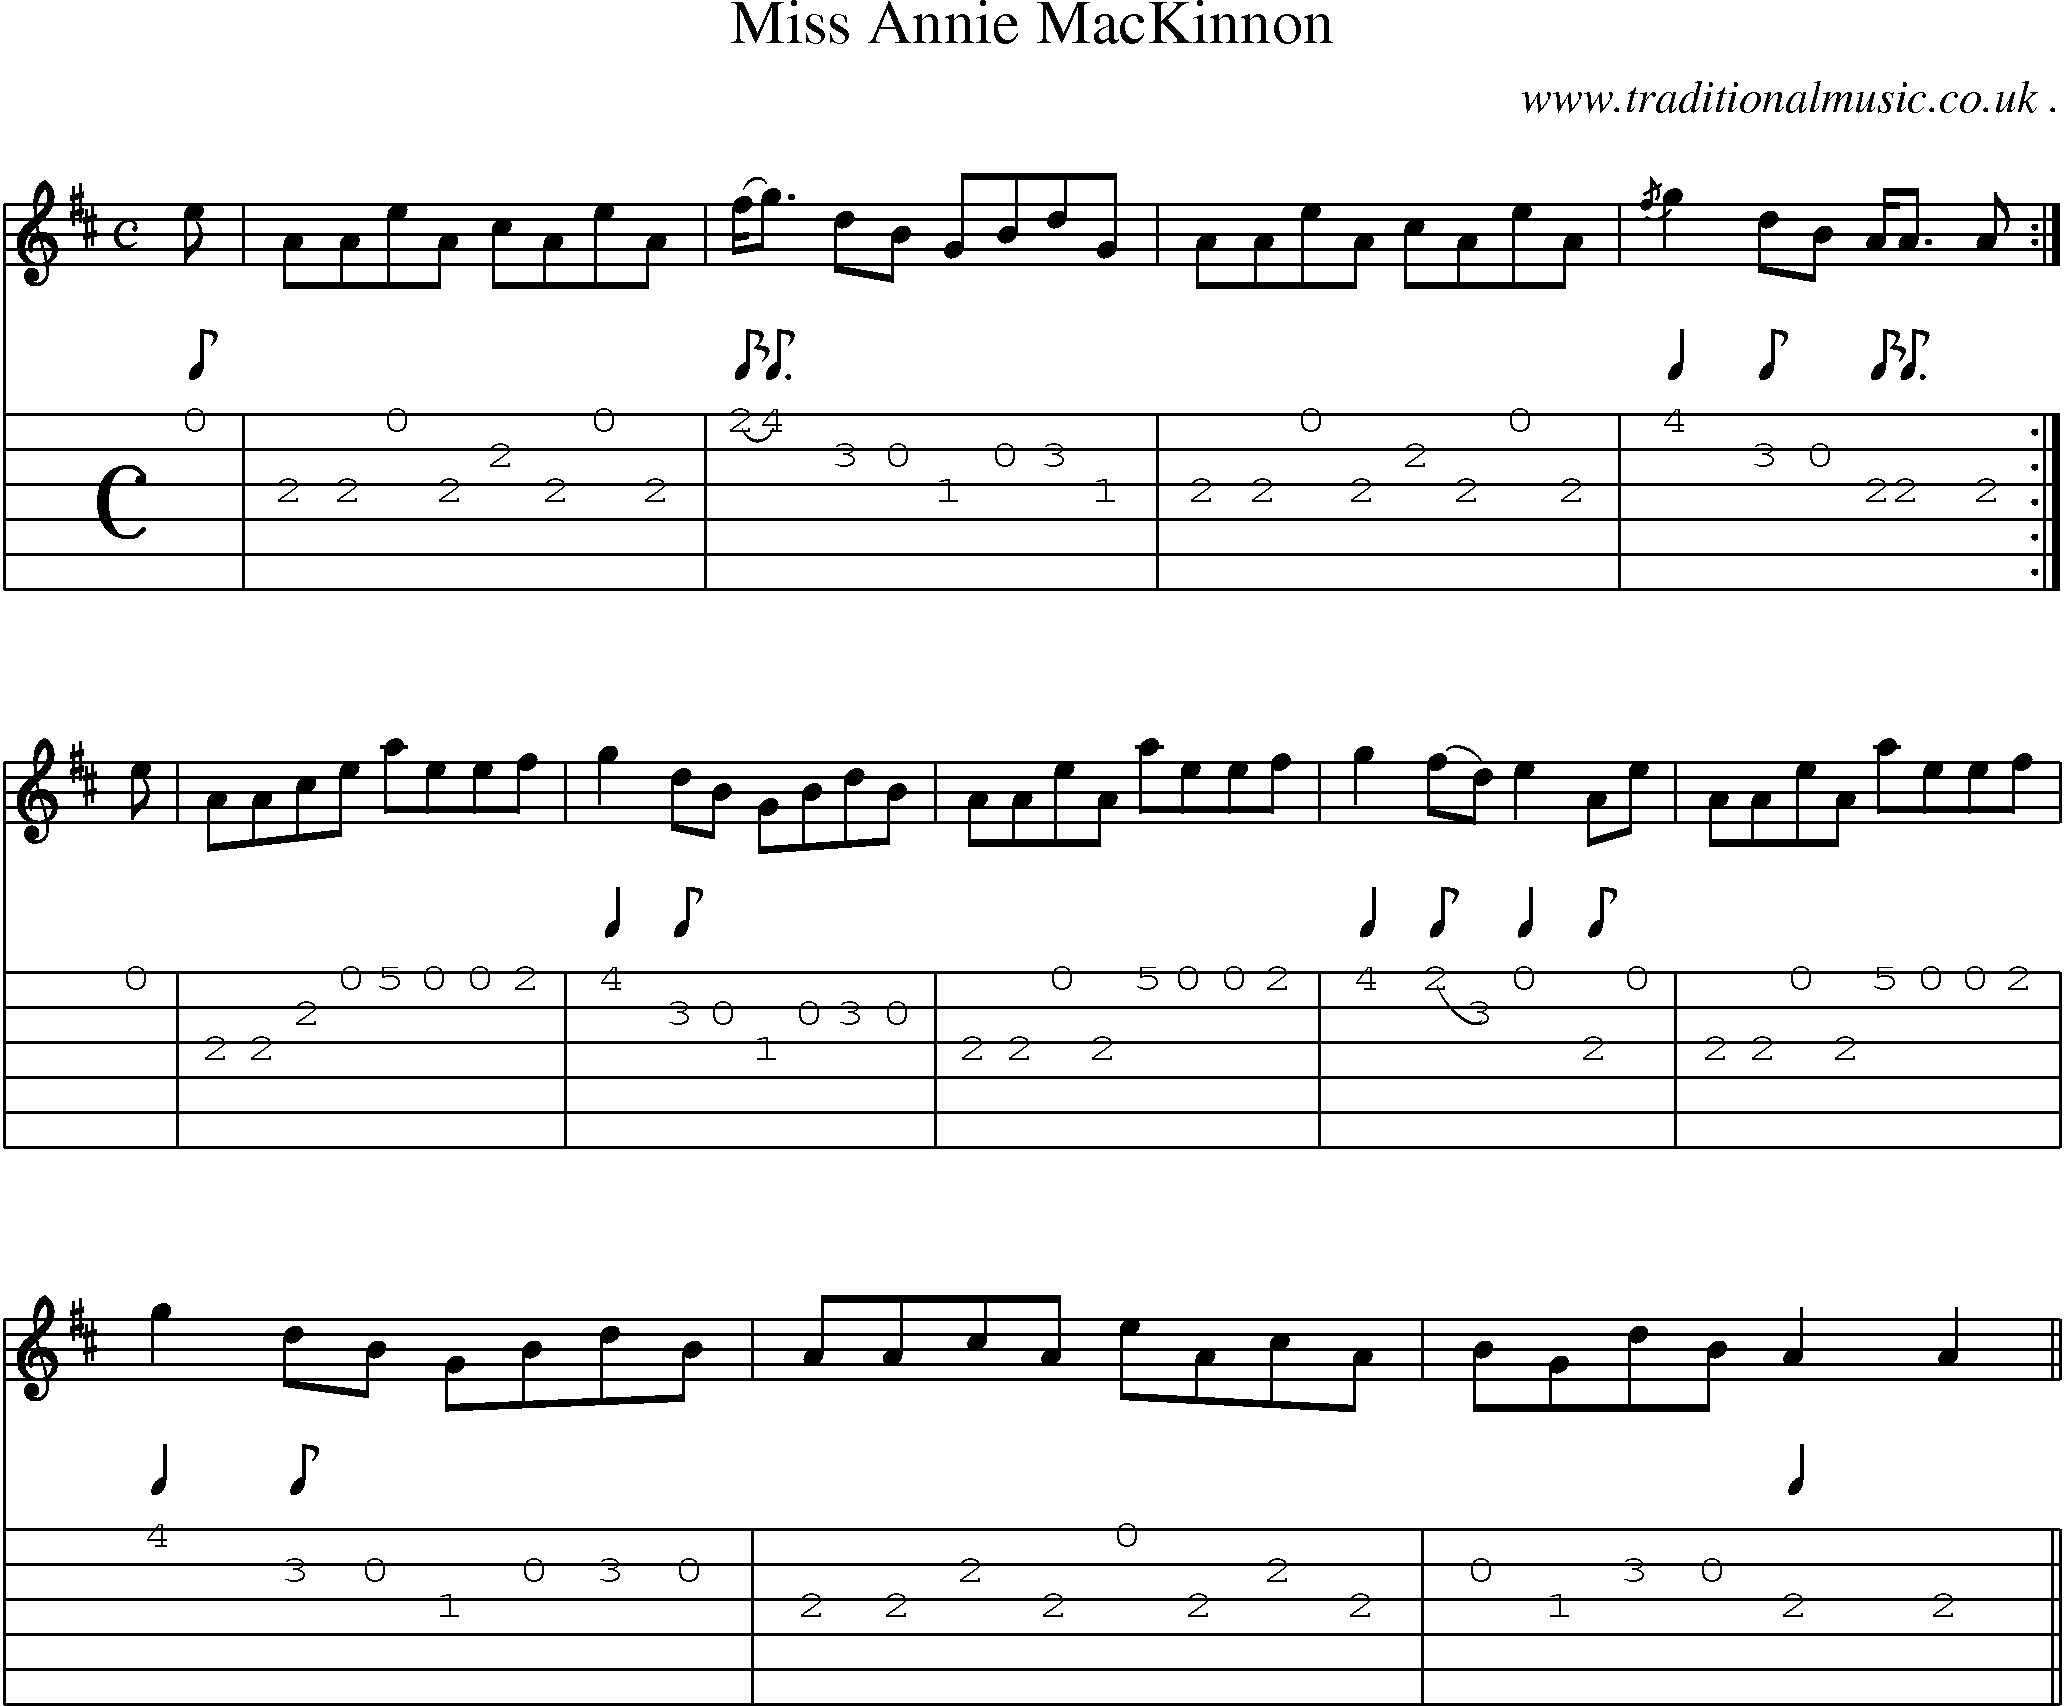 Sheet-music  score, Chords and Guitar Tabs for Miss Annie Mackinnon